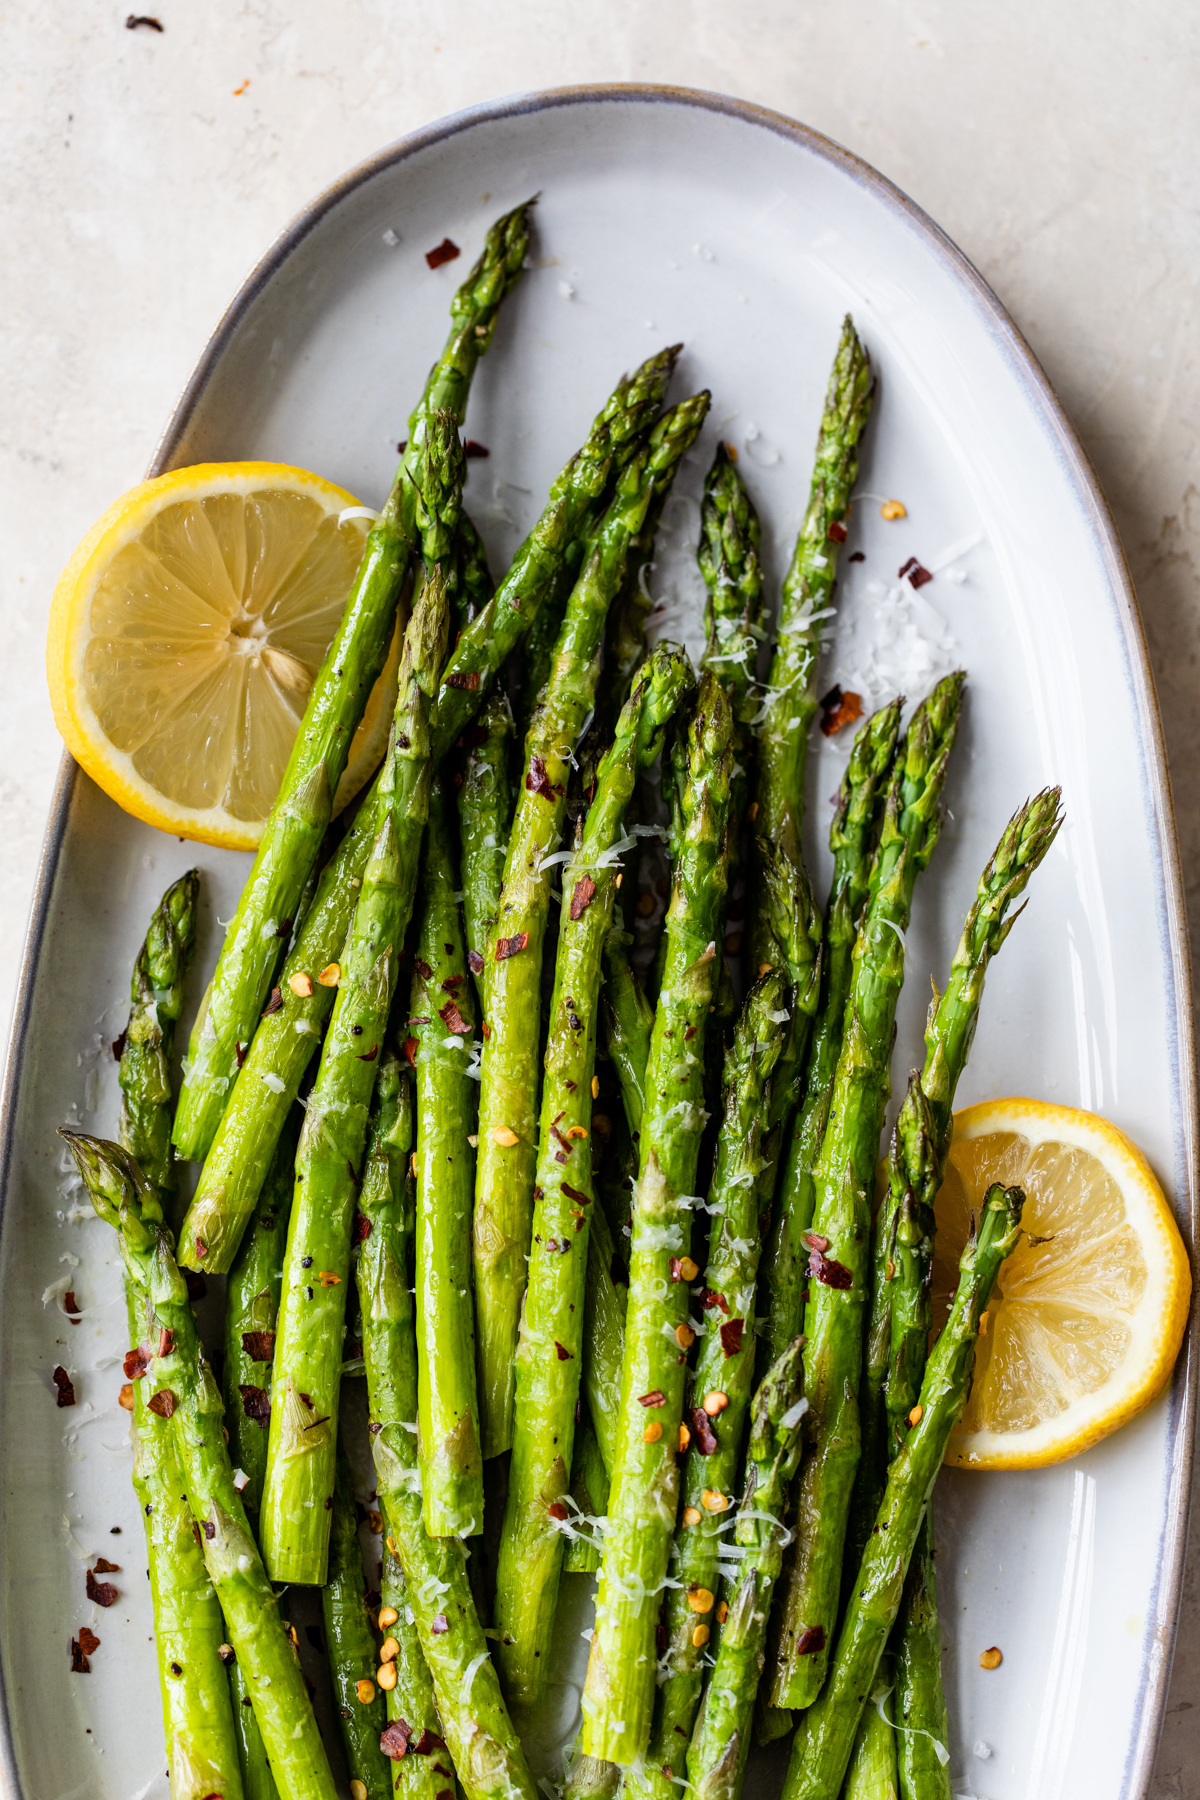 Roasted asparagus topped with Parmesan cheese and red pepper flakes - served with fresh lemon.